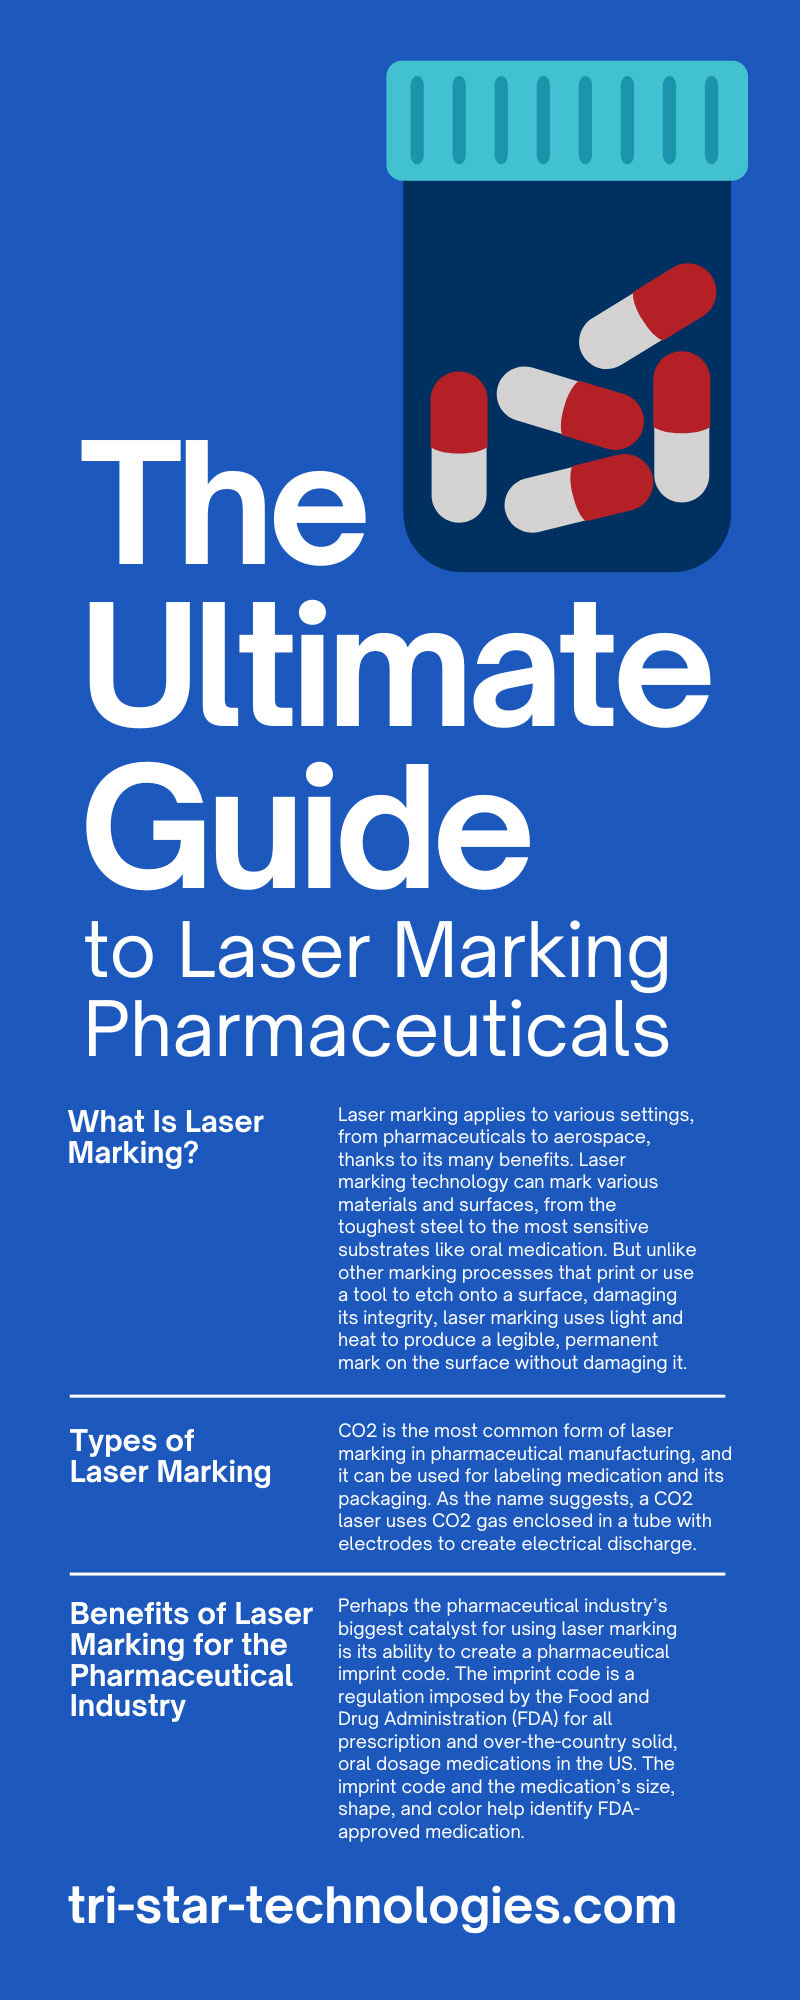 The Ultimate Guide to Laser Marking Pharmaceuticals